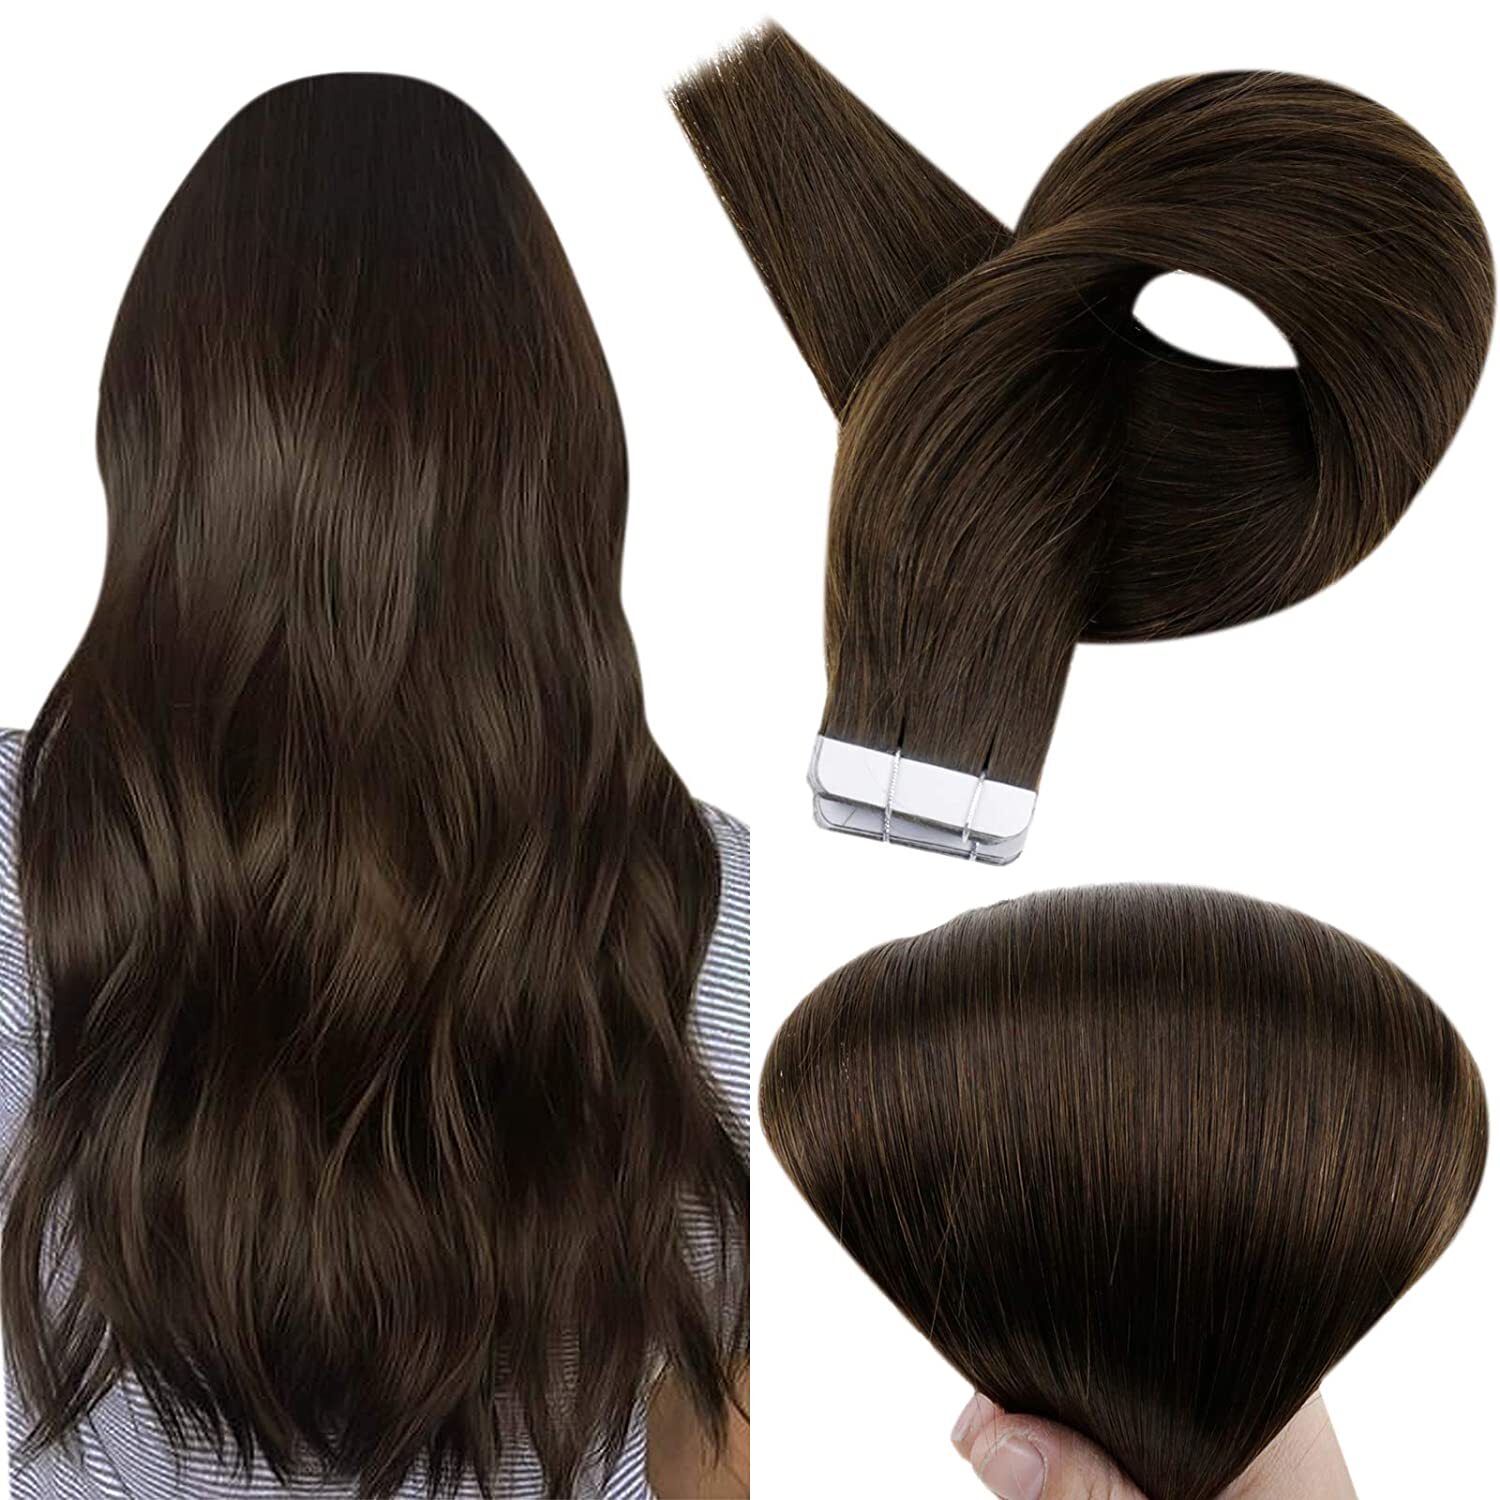 No one will know these seamless extensions aren't your real hair